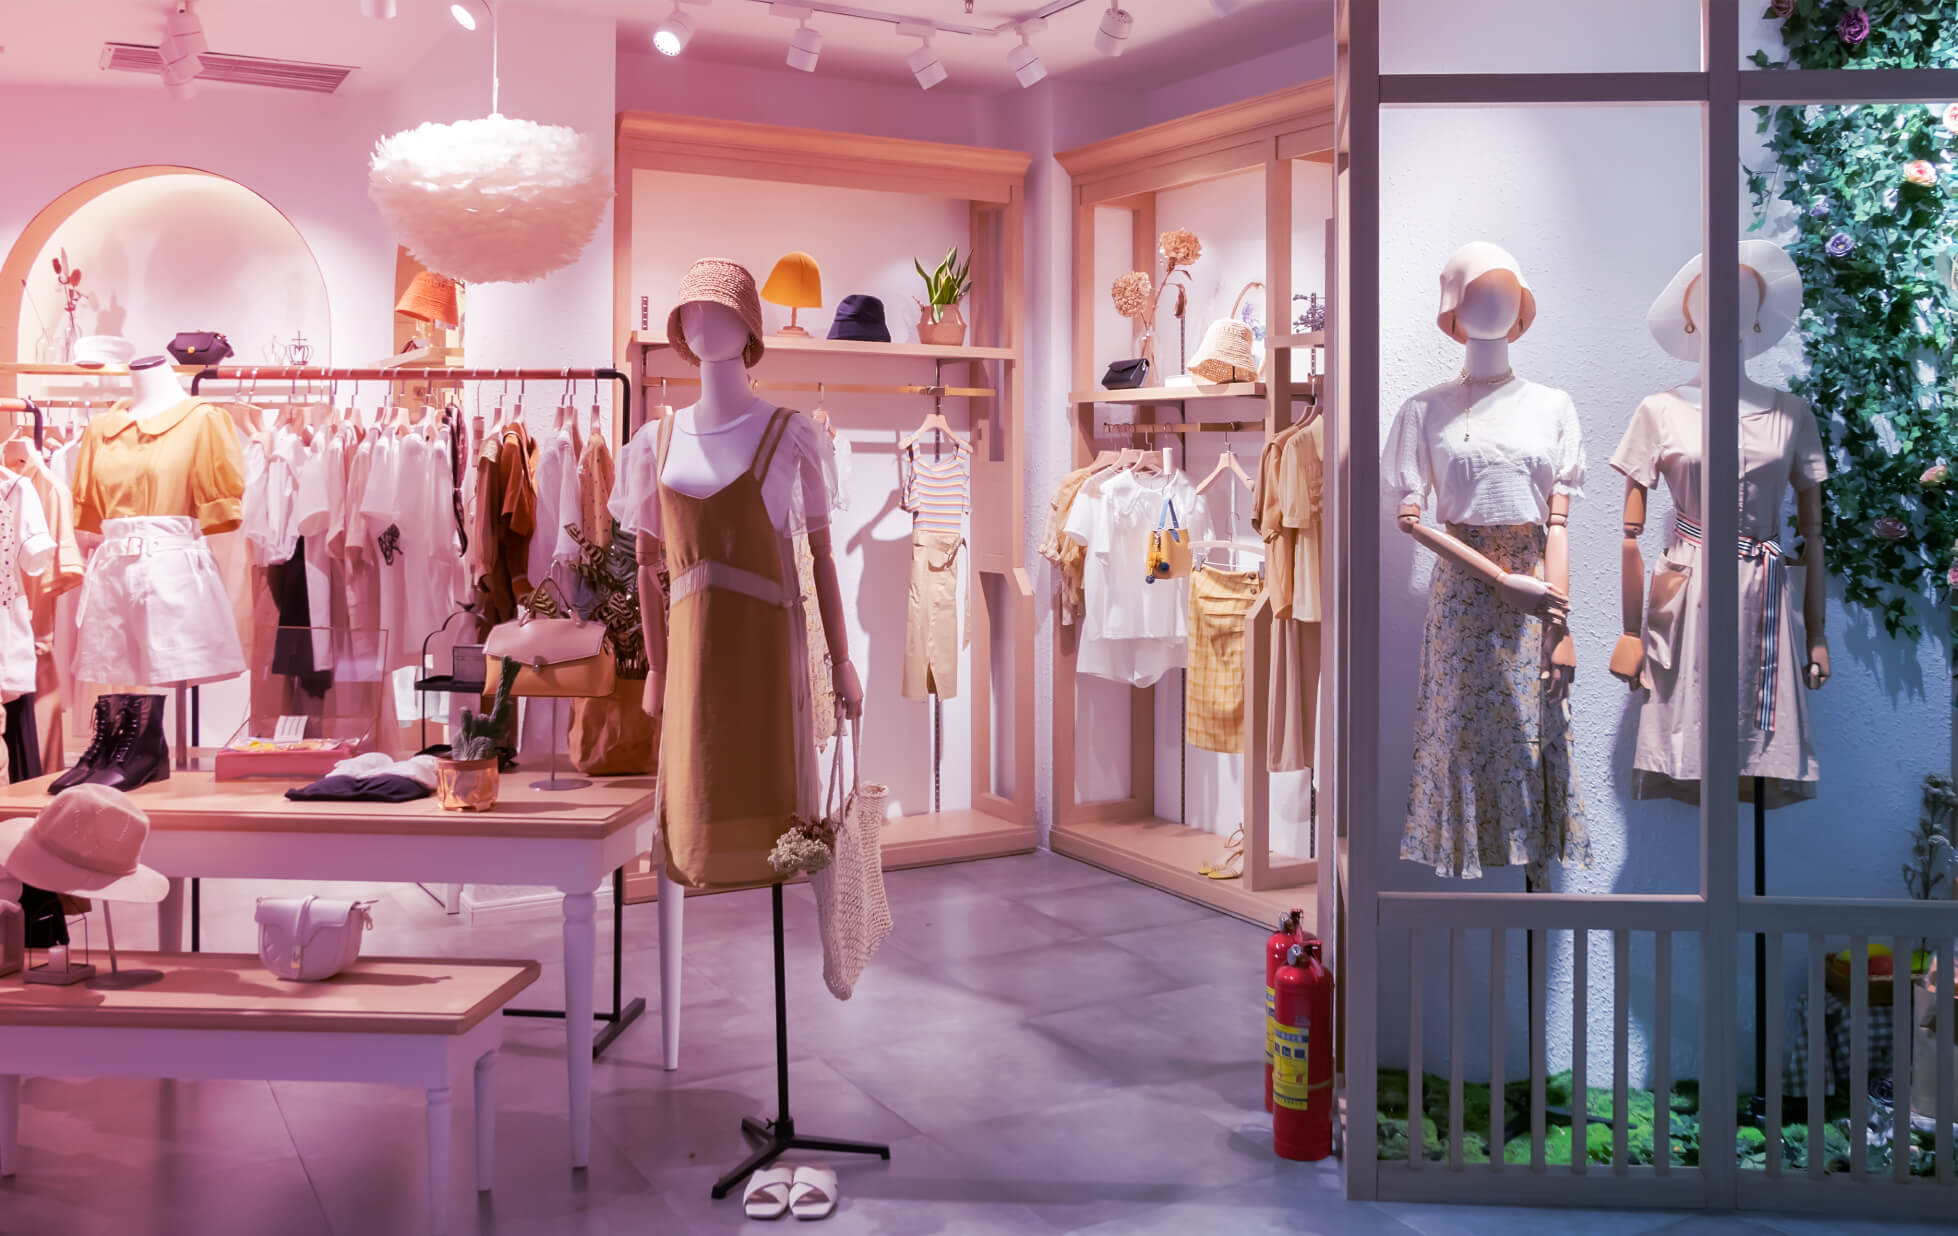 10 Best Ideas To Make Your Retail Store Look More Elegant And Stylish